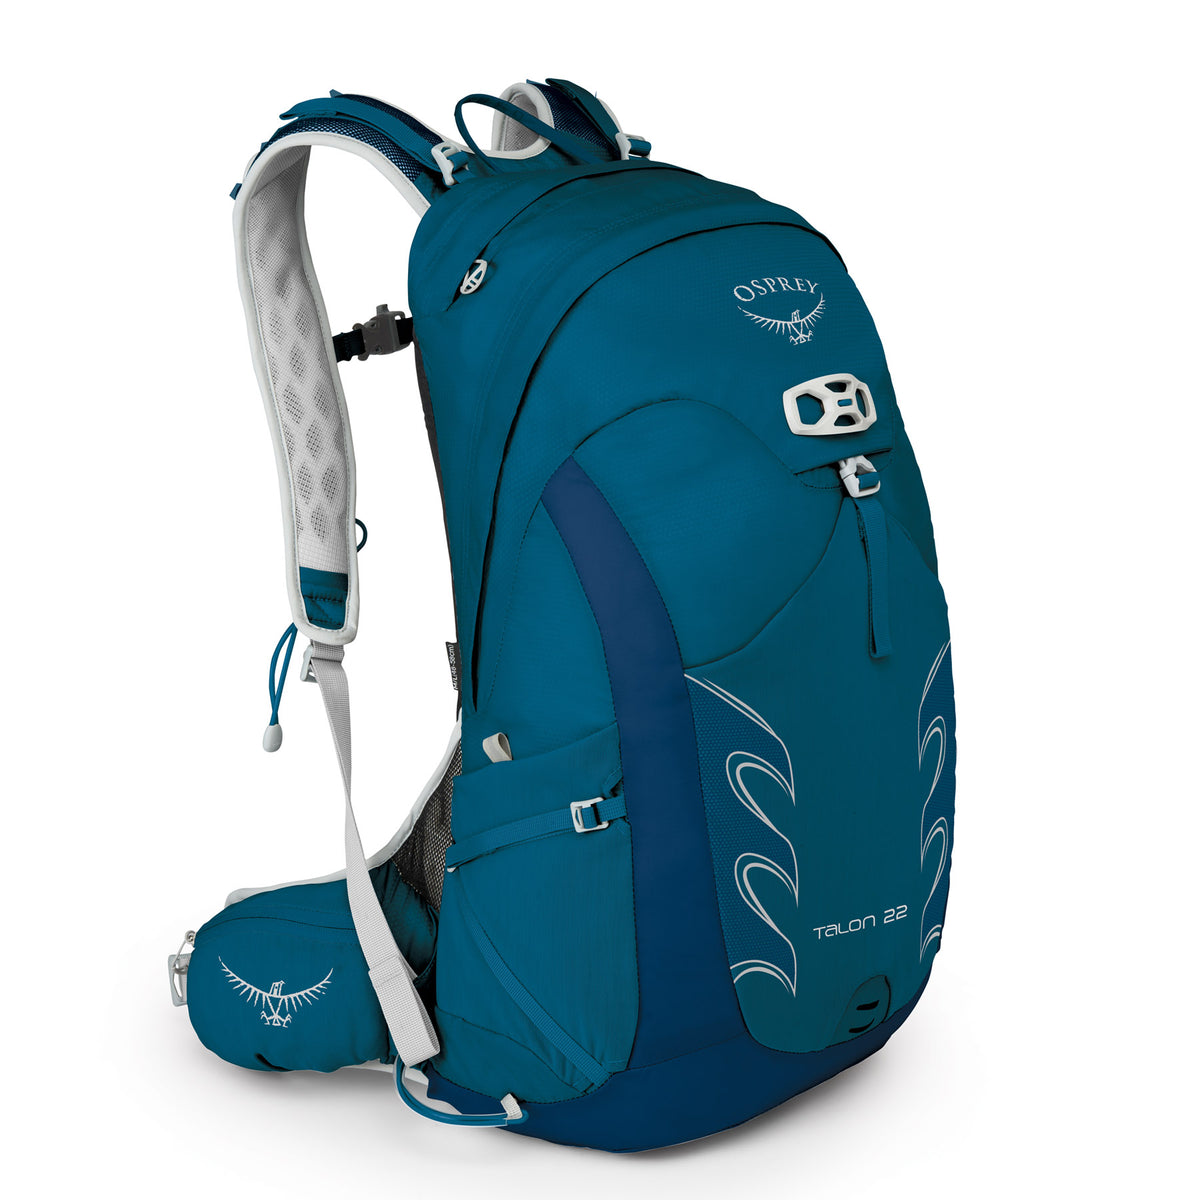 Men&#39;s Talon 22 Pack in Blue showing helmet holding clip, mesh water bottle side pockets, and a convenient mesh front pocket for quick-access items.